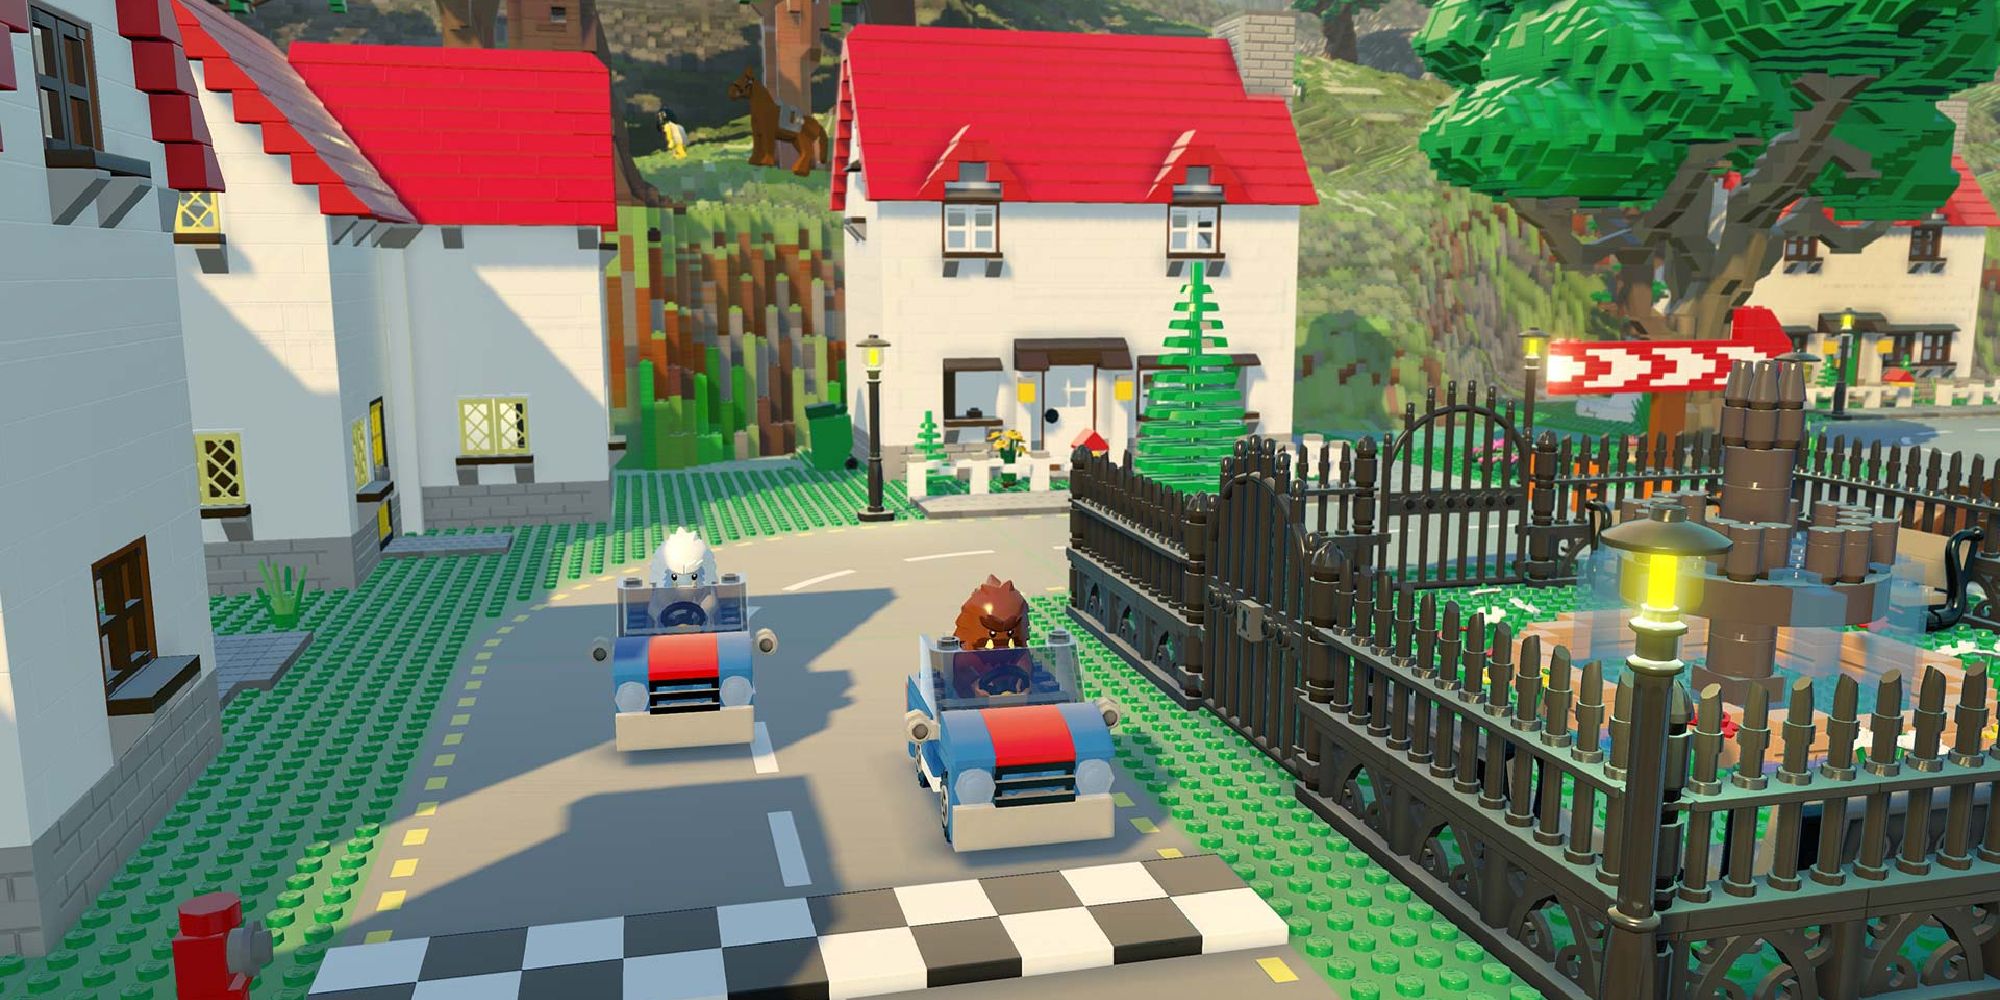 lego worlds gameplay with two characters racing